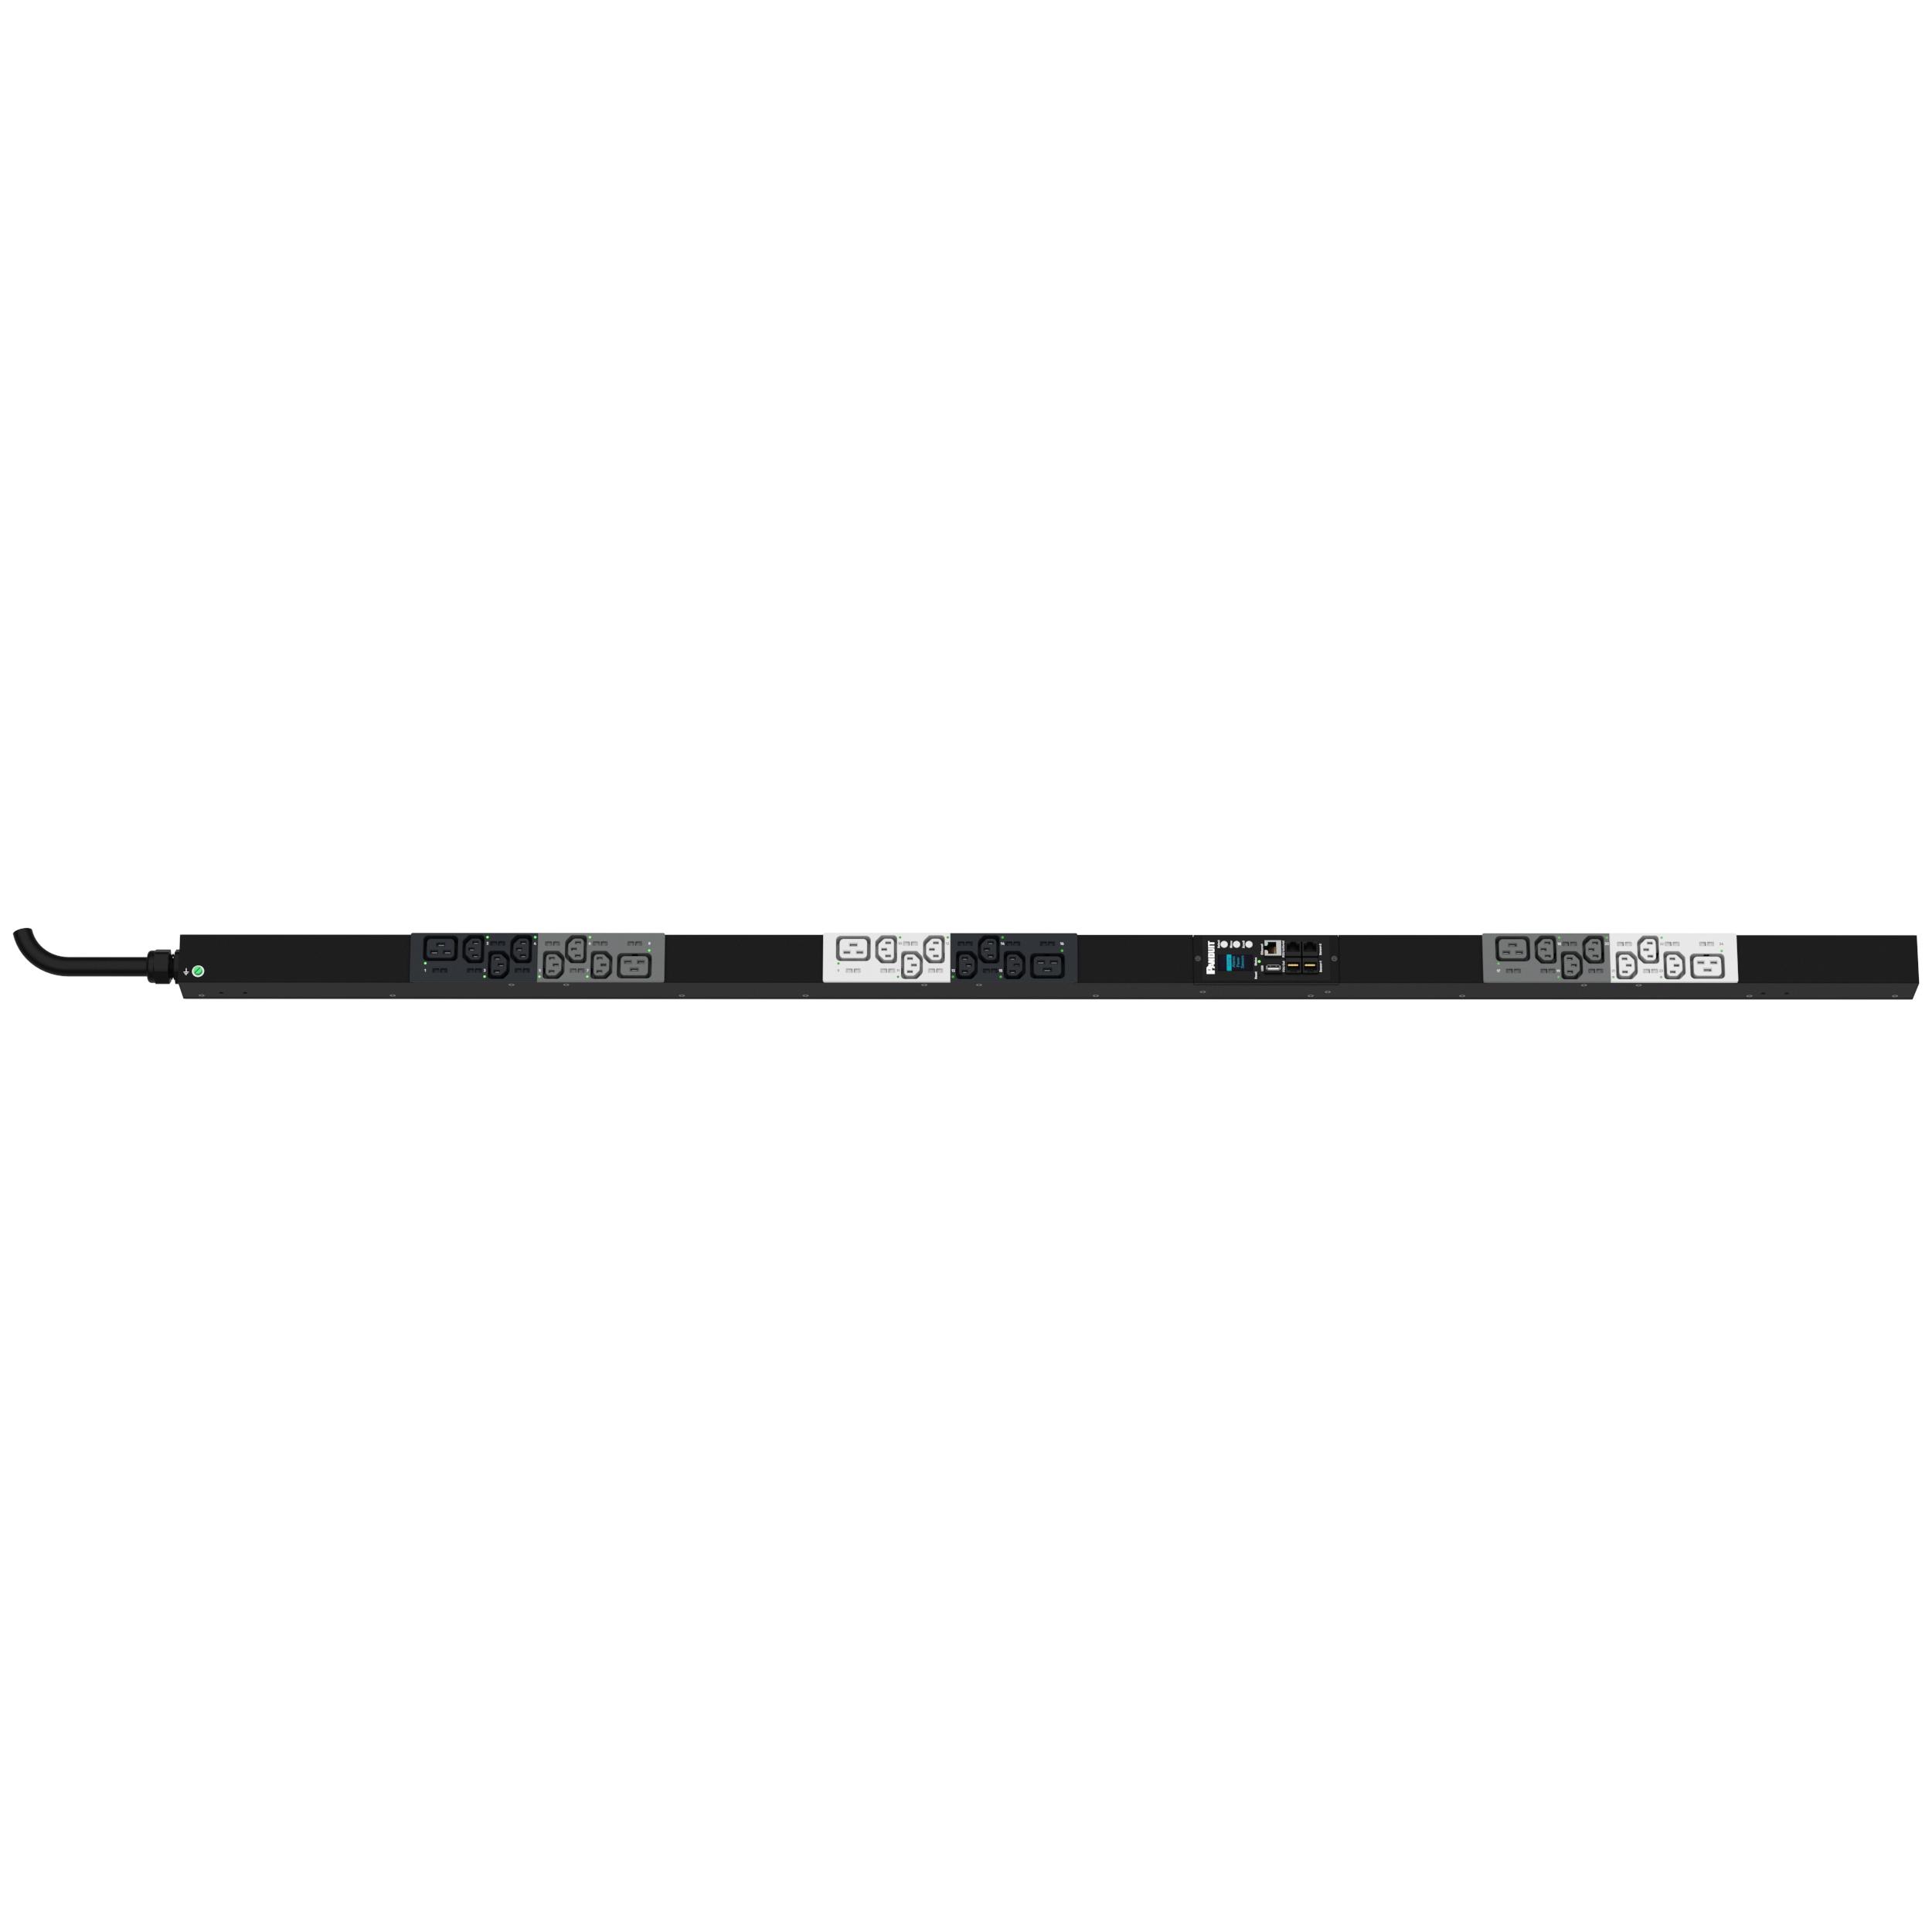 Panduit P24G07M SmartZone™ Monitored & Switched per Outlet PDU